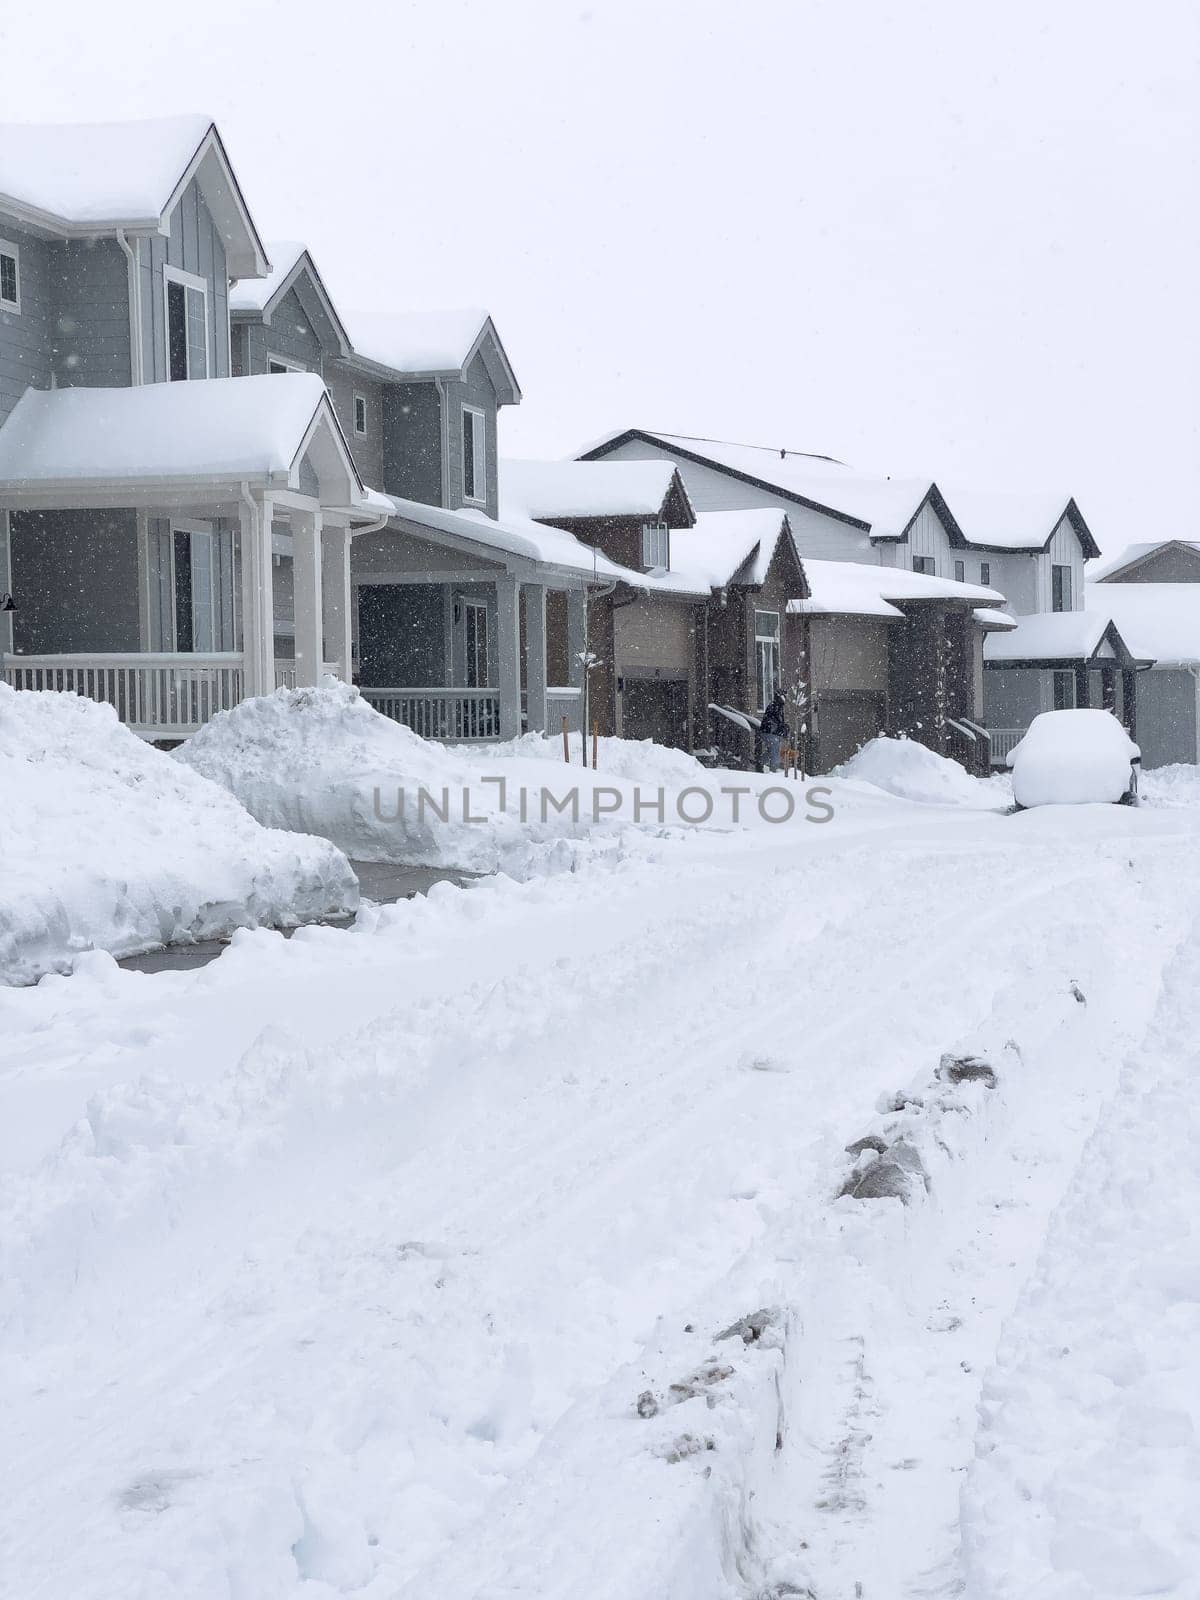 The scene depicts a suburban tranquility with homes lining a street blanketed in snow, punctuated by a cleared path that weaves through the winter wonderland. The overcast sky promises more snow, creating a hushed atmosphere over the neighborhood.